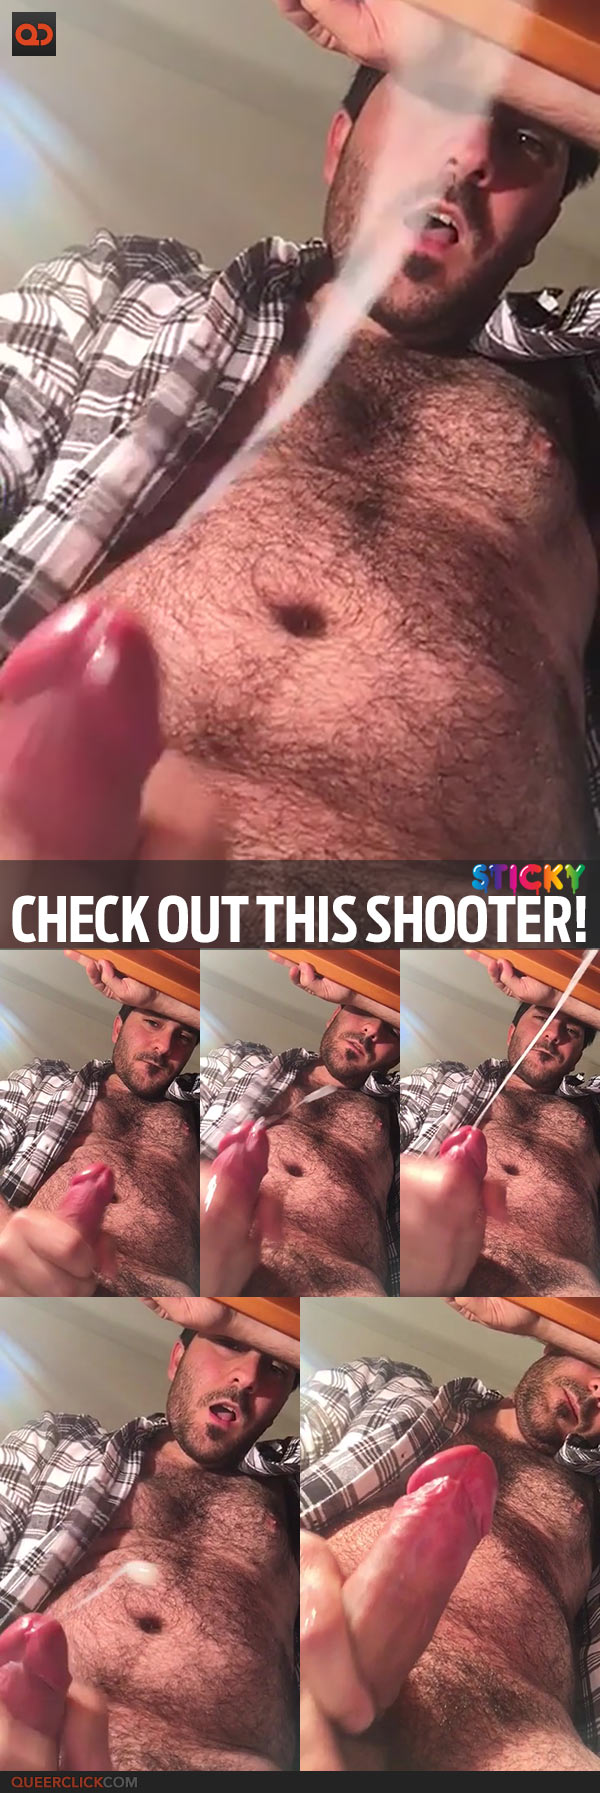 Check Out This Shooter!